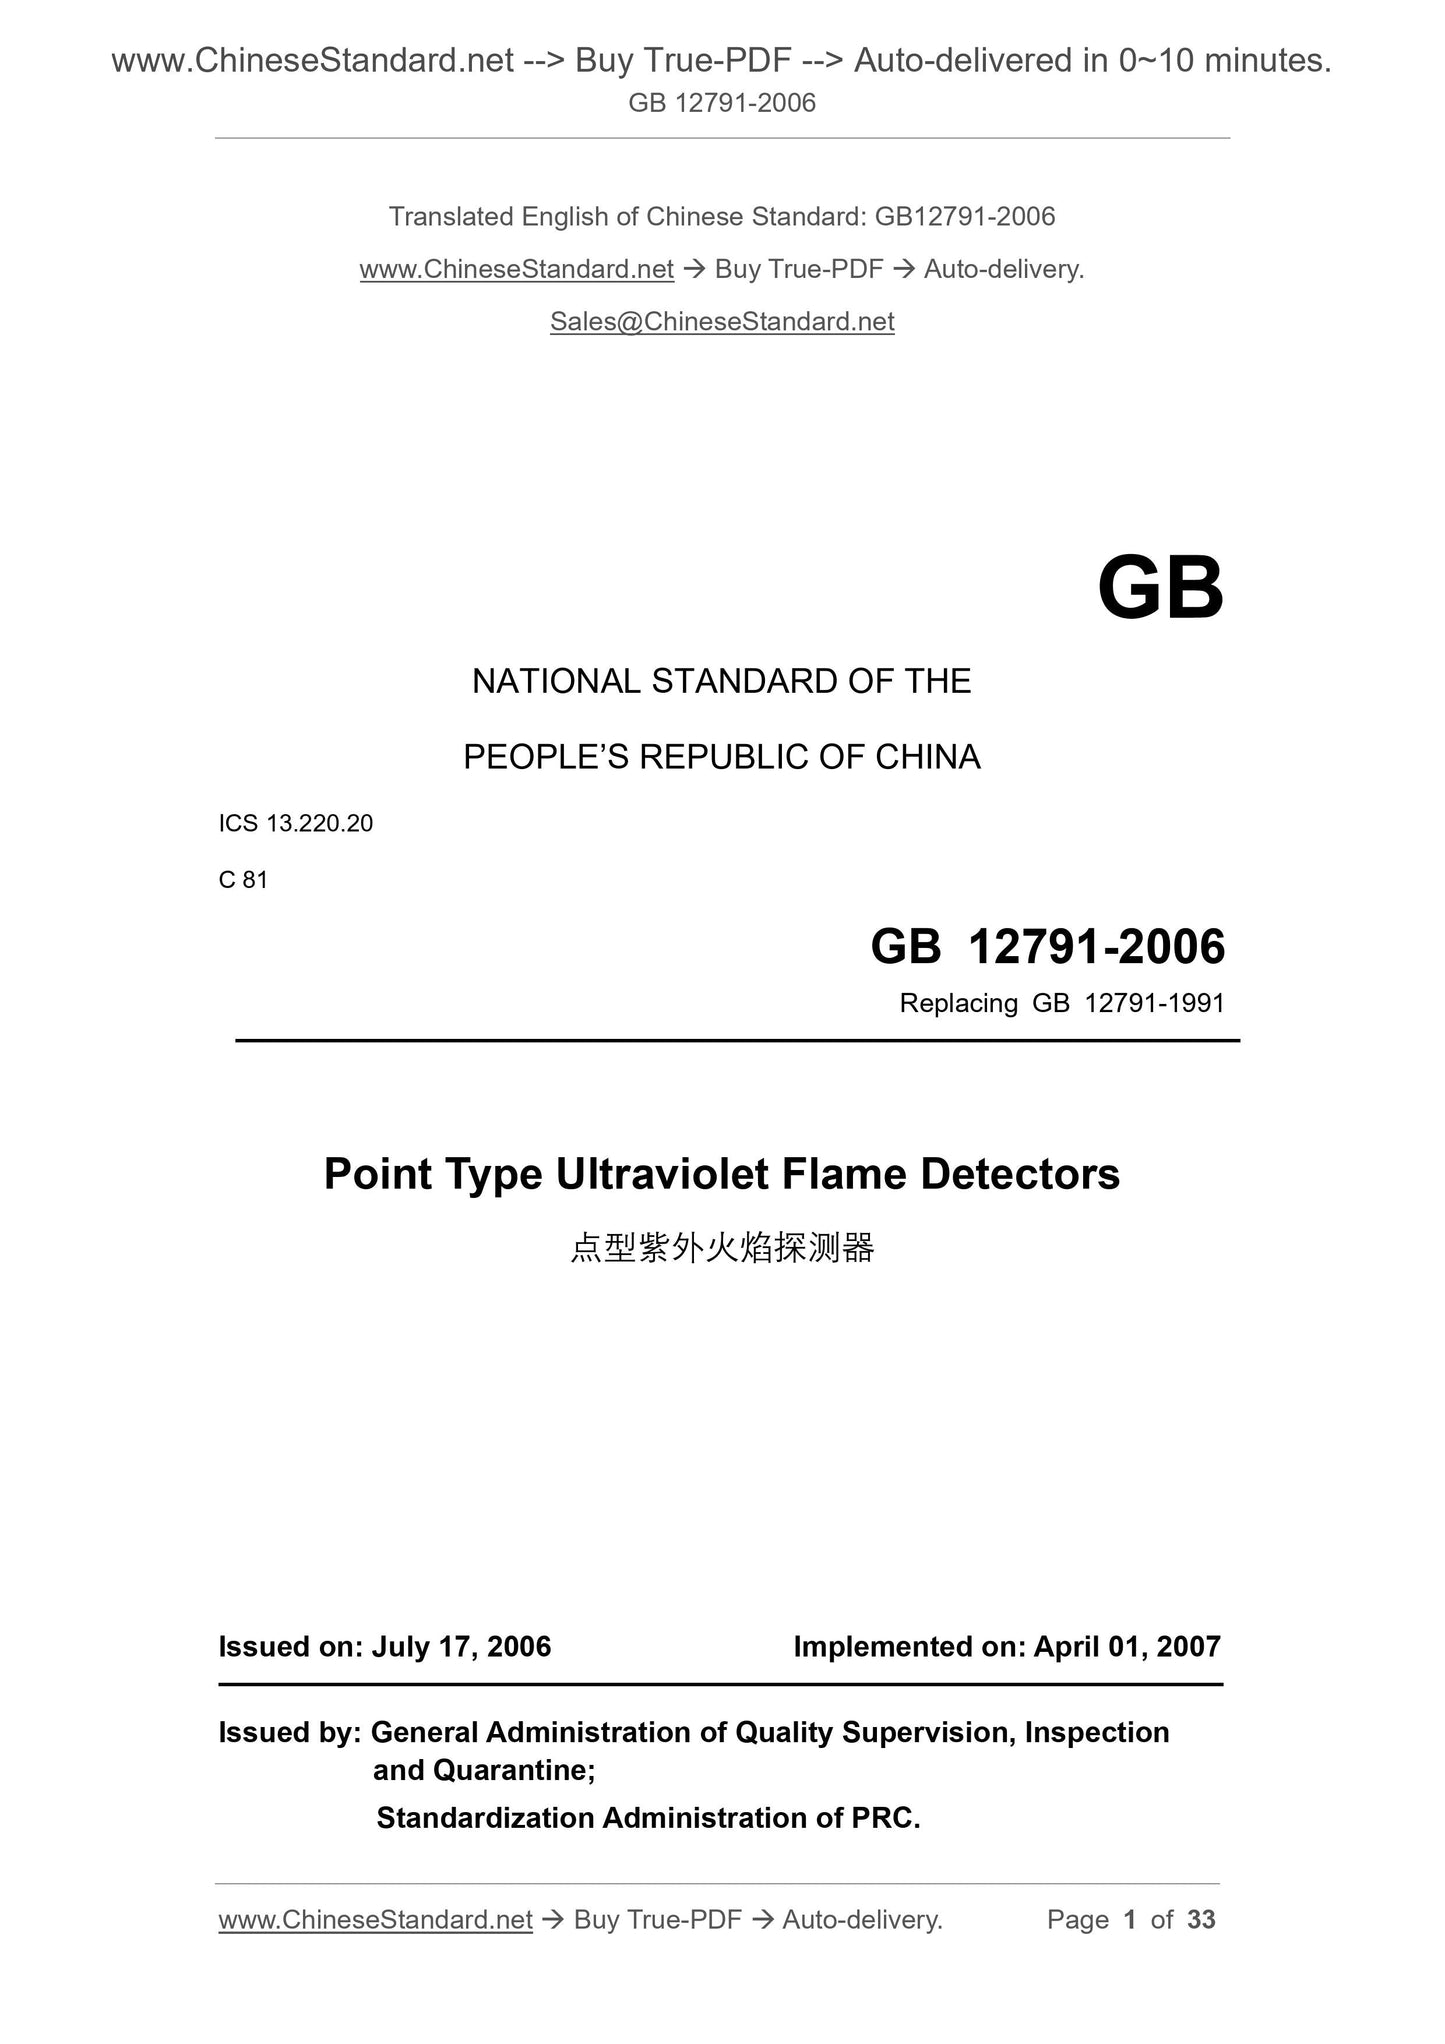 GB 12791-2006 Page 1